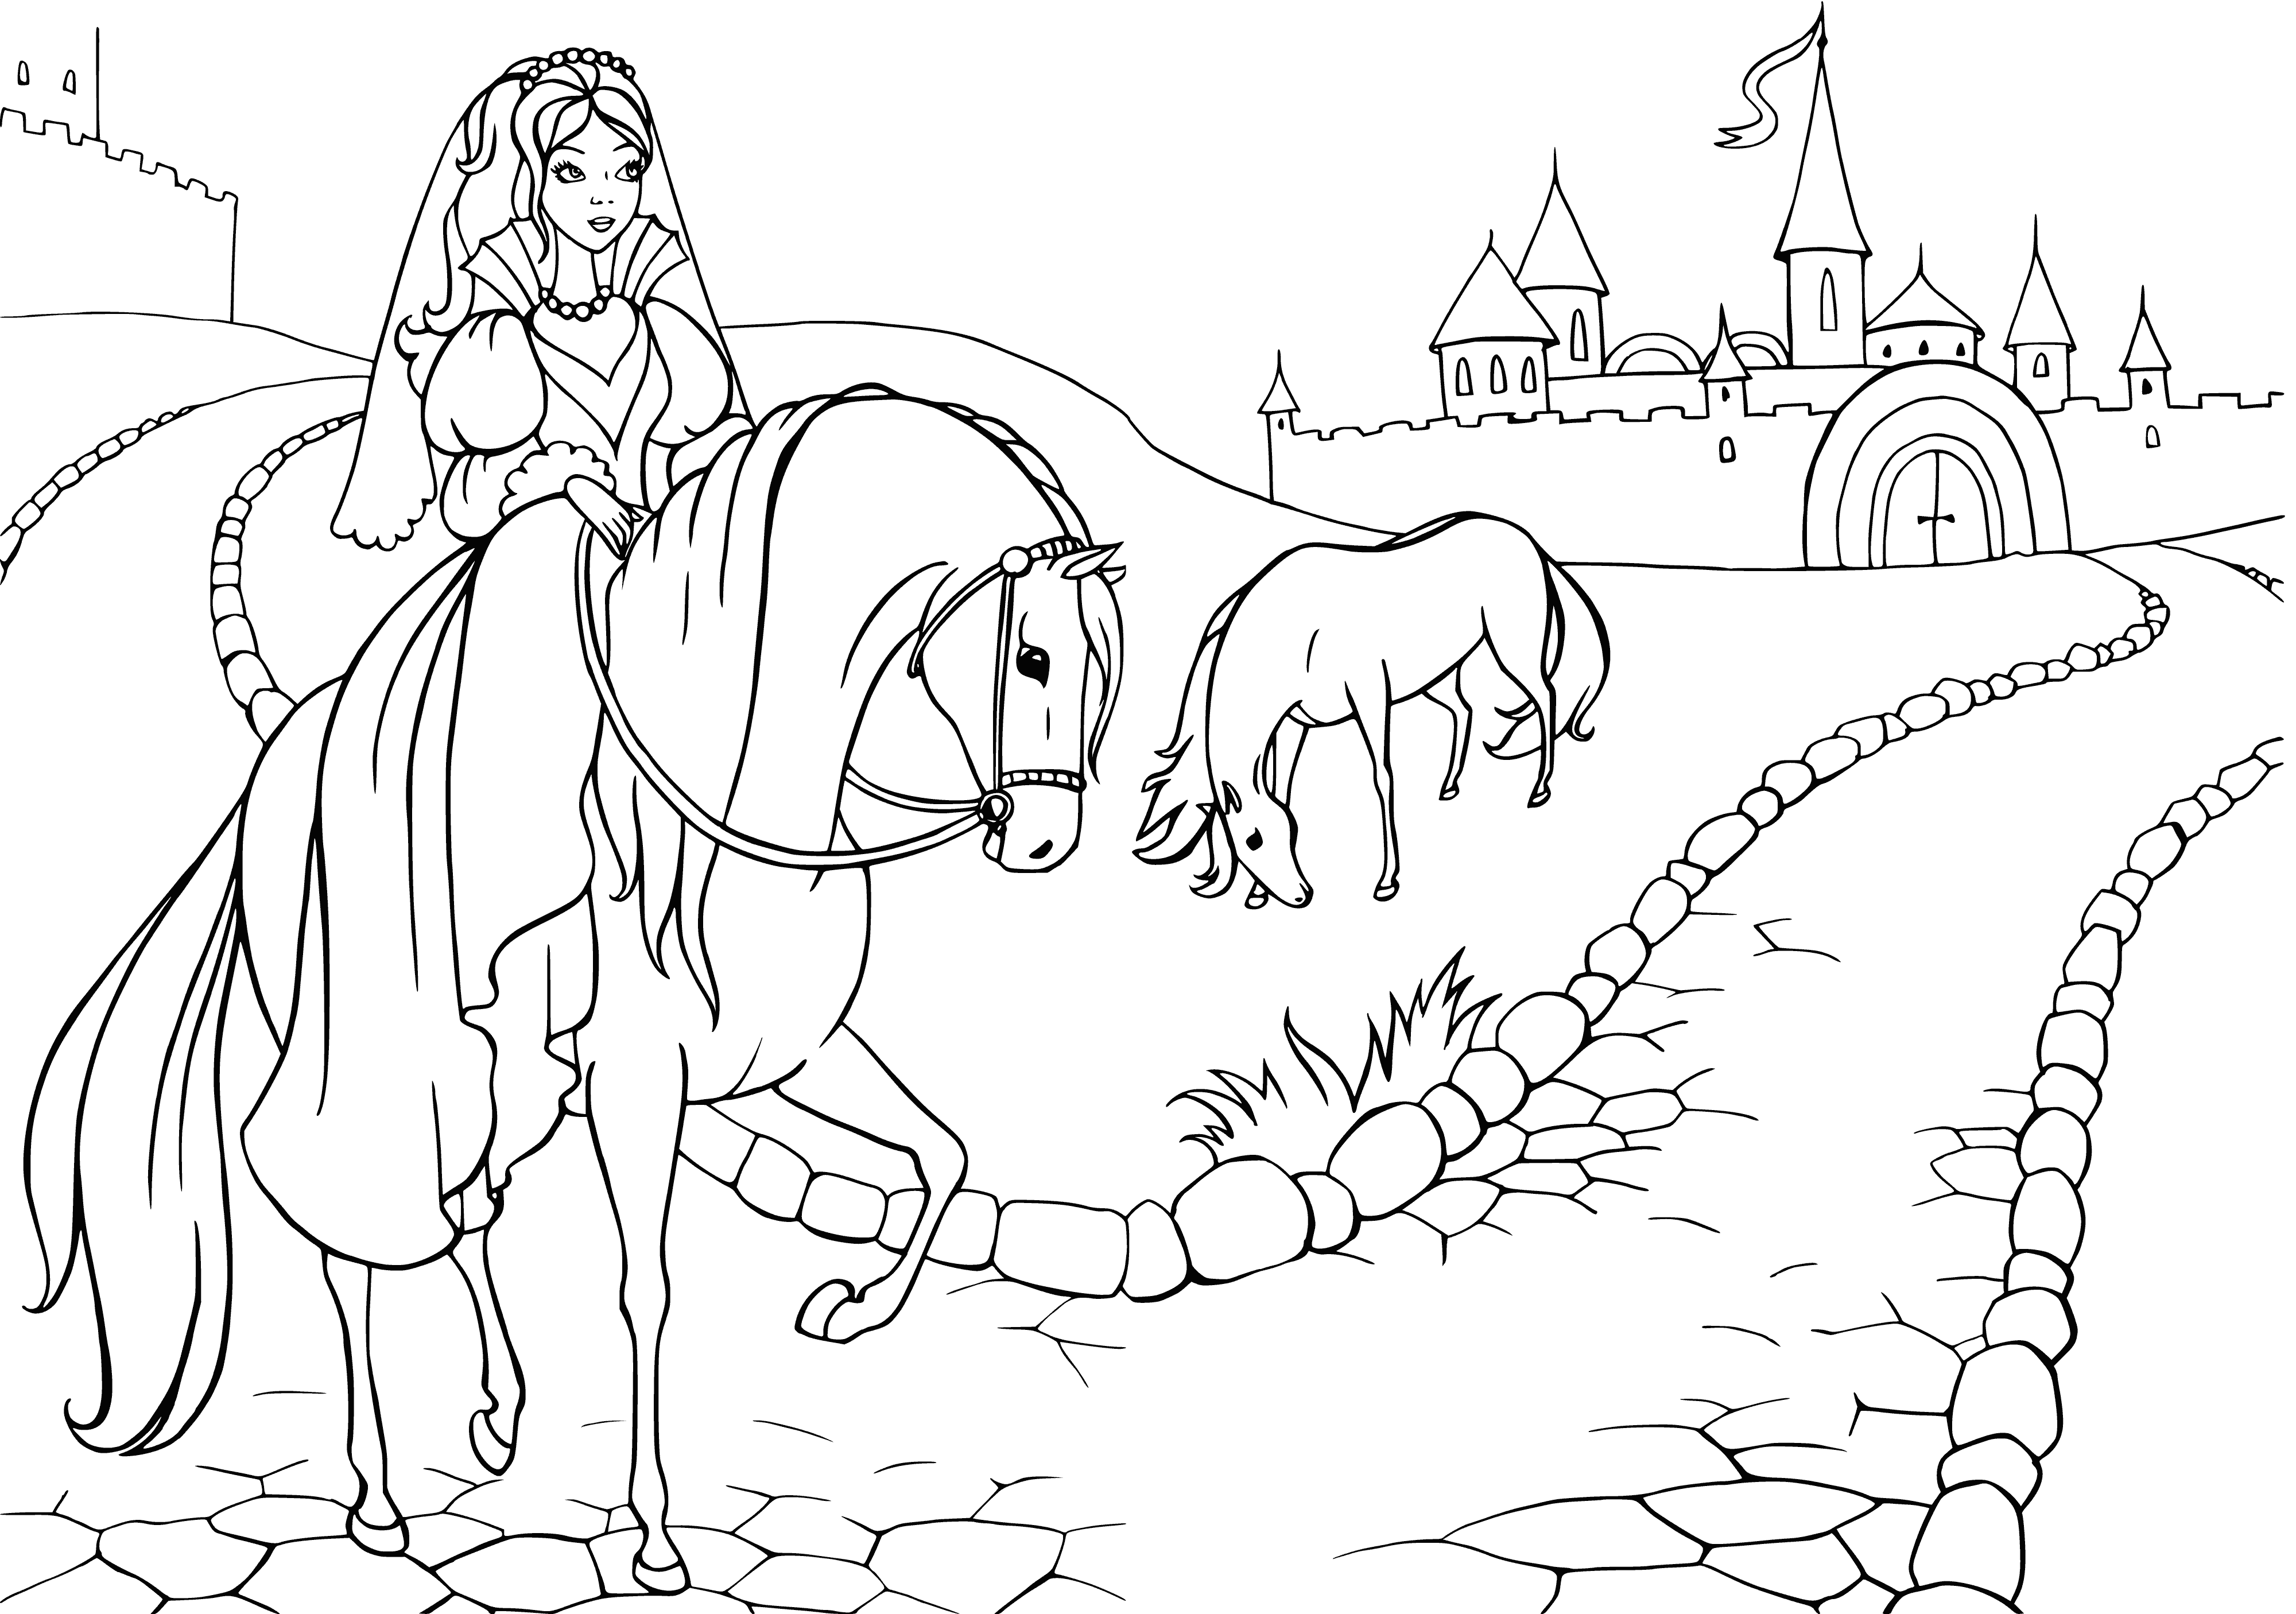 coloring page: Fairy Kingdom: Hidden in the forest, a magical place of beauty and wonder where fairies dance and soar, ruled by a wise queen with kindness.